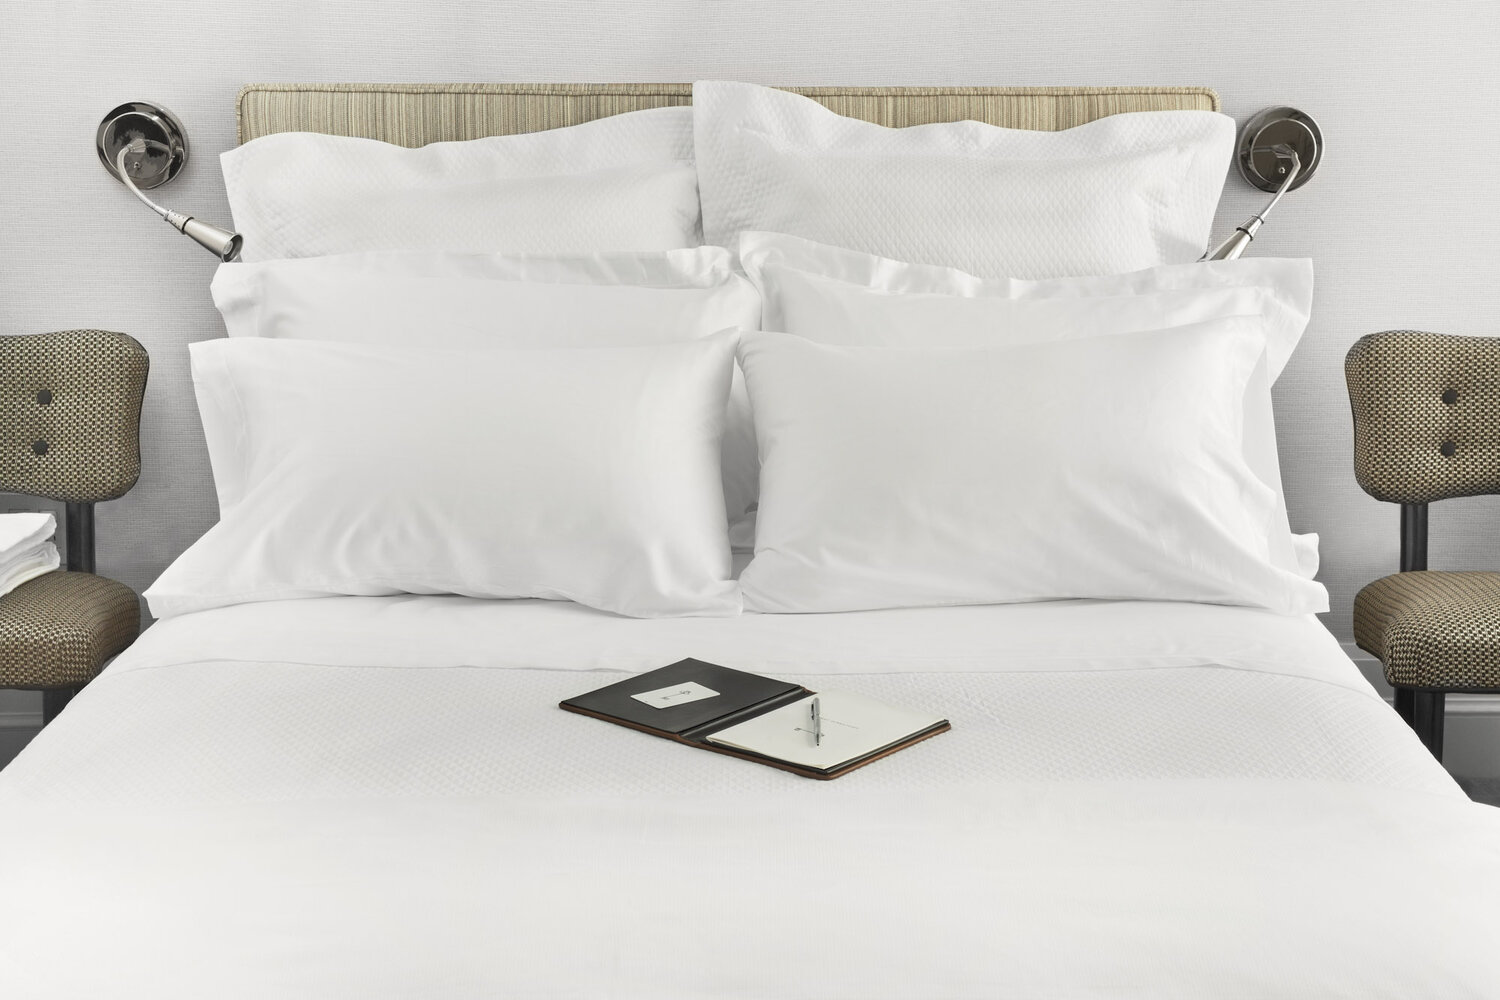 What Type of Sheets Do Luxury Hotels Use?